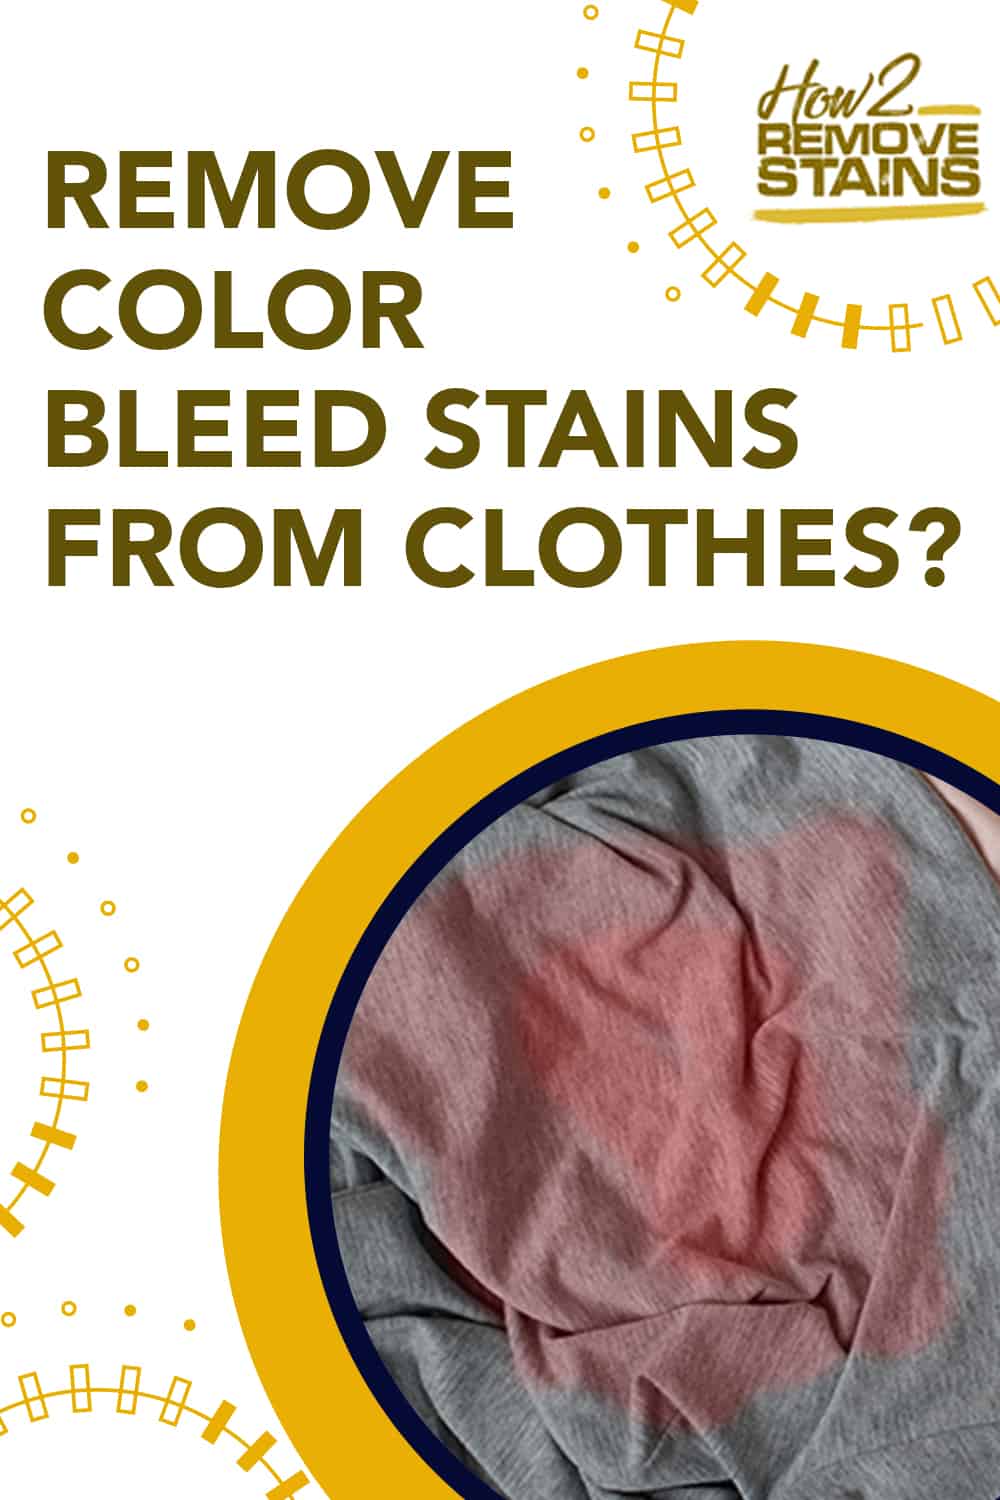 How to remove color bleed stains from clothes [ Detailed Answer ]